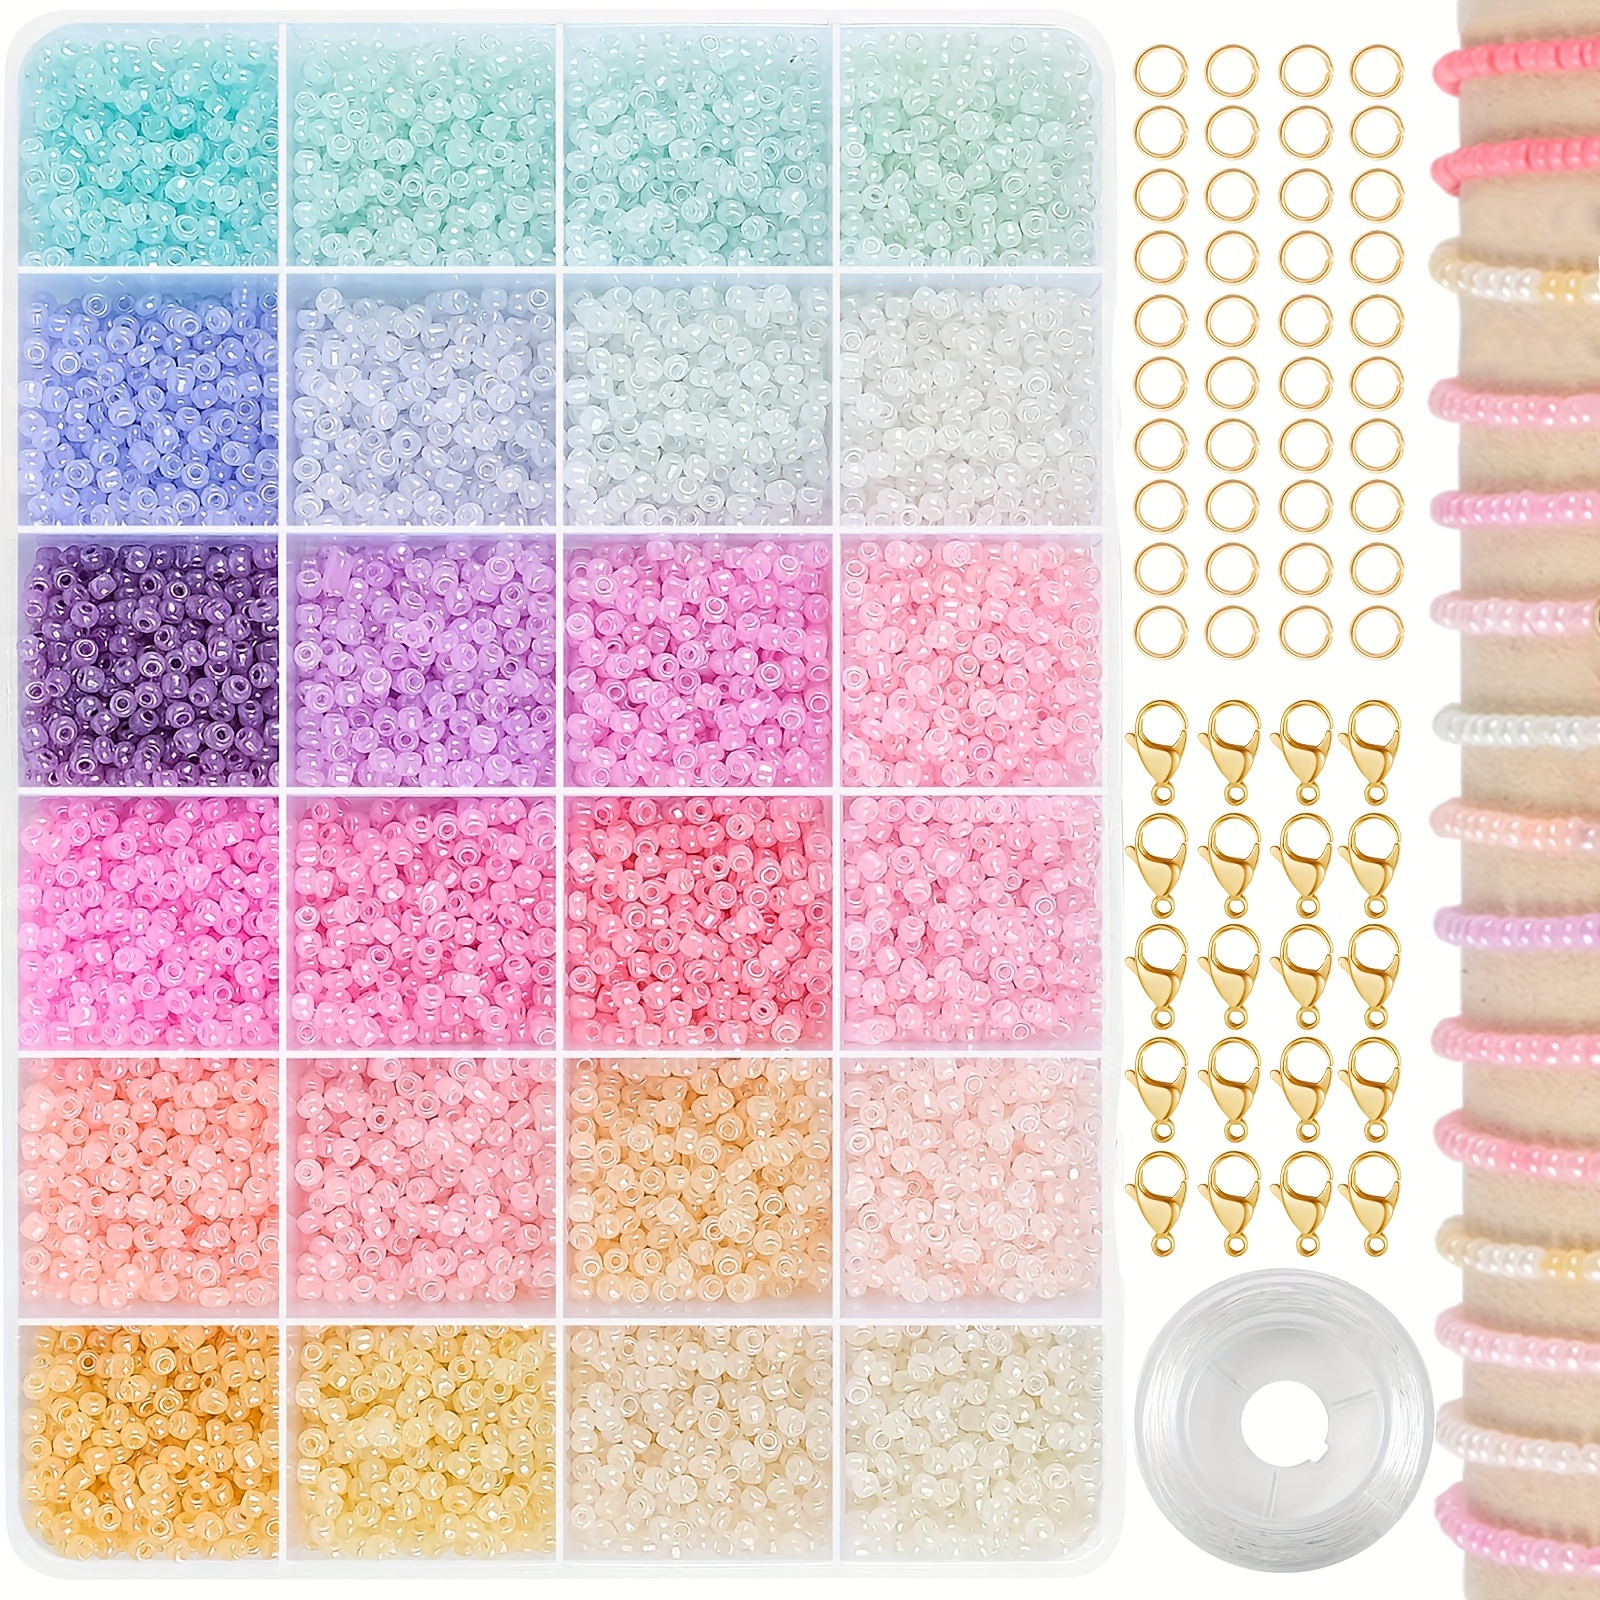 

1 Pack 24 Colors Glass Beads Kit, 4mm Creamy Glass Seed Beads With String And Clasps Accessories For Jewelry Making, Diy Bracelet & Necklace